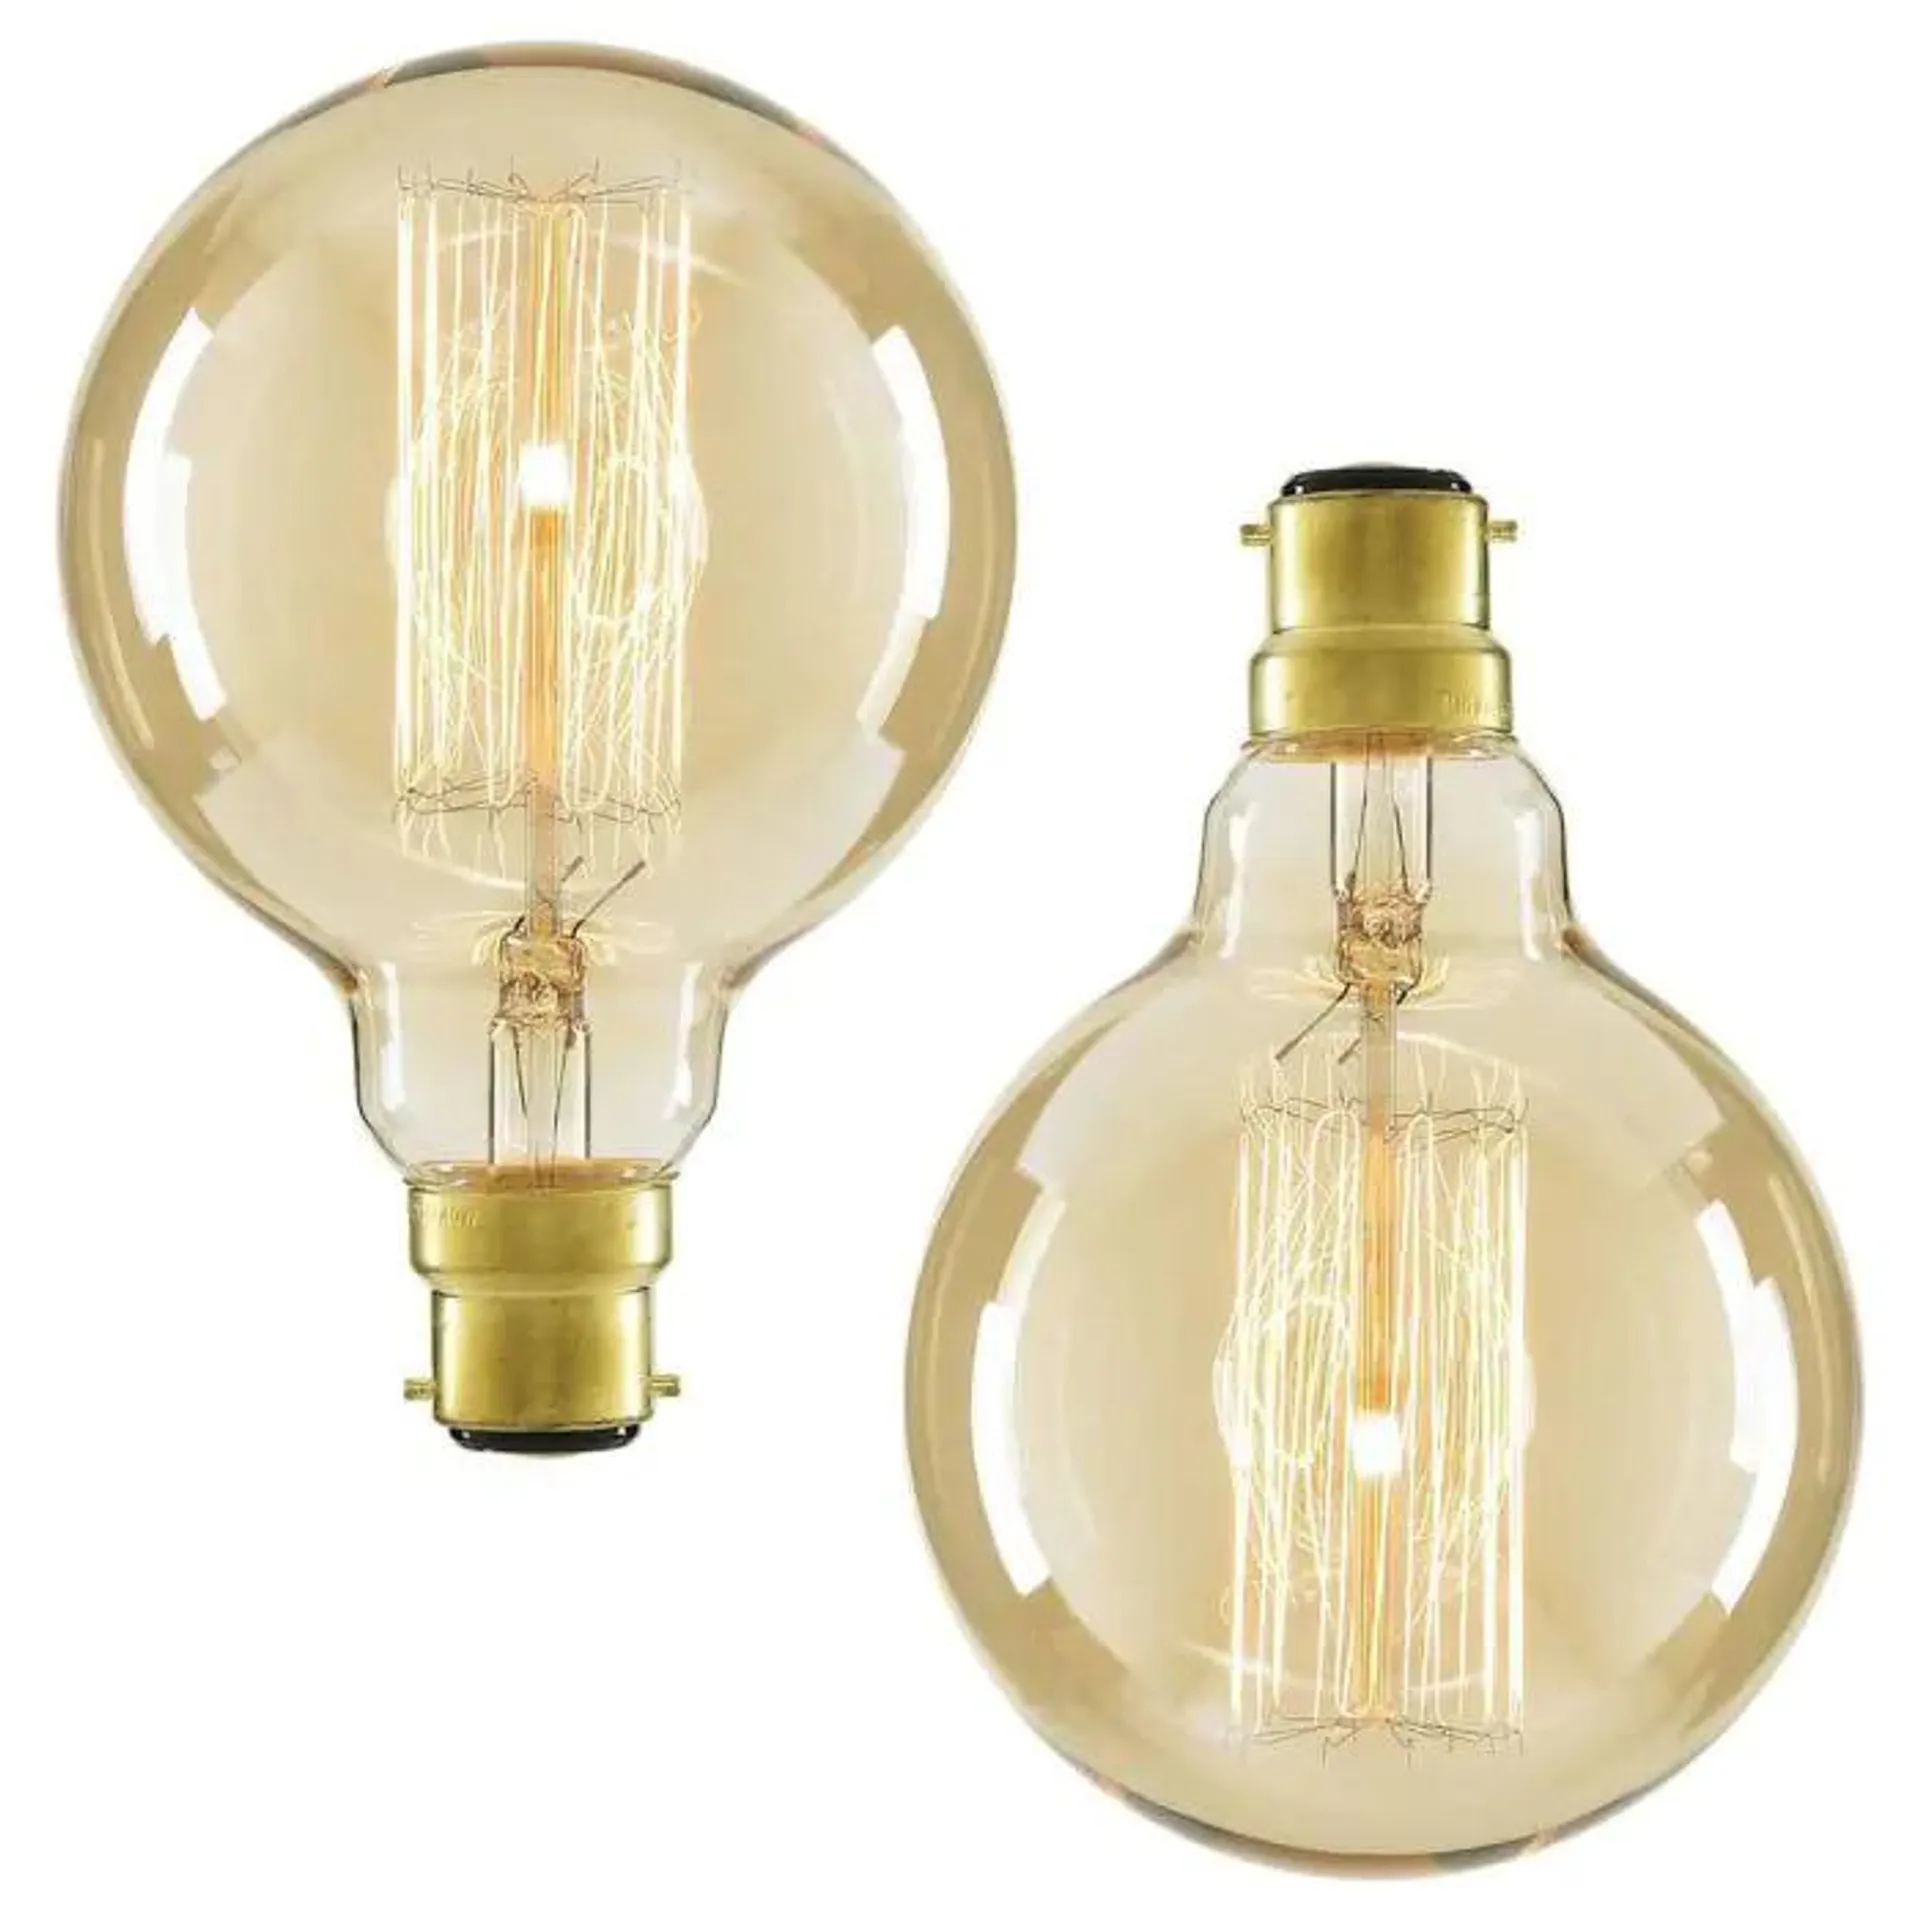 2 Pack of 40W BC B22 Vintage Filament Globe Bulb, Gold Tinted